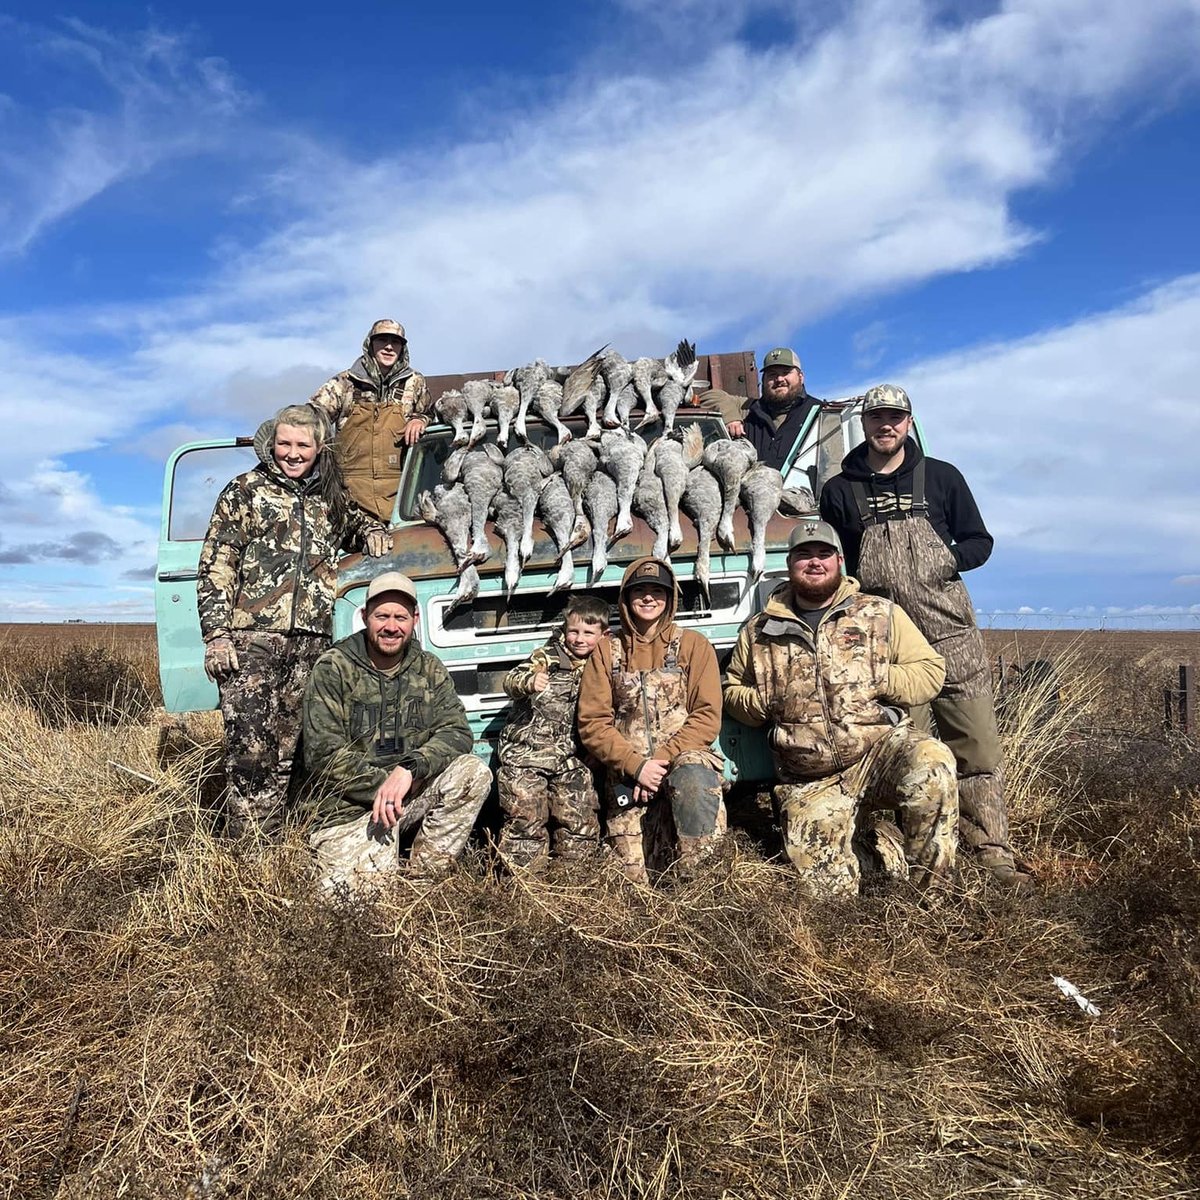 Group of hunters with sandhill cranes in front of blue truck